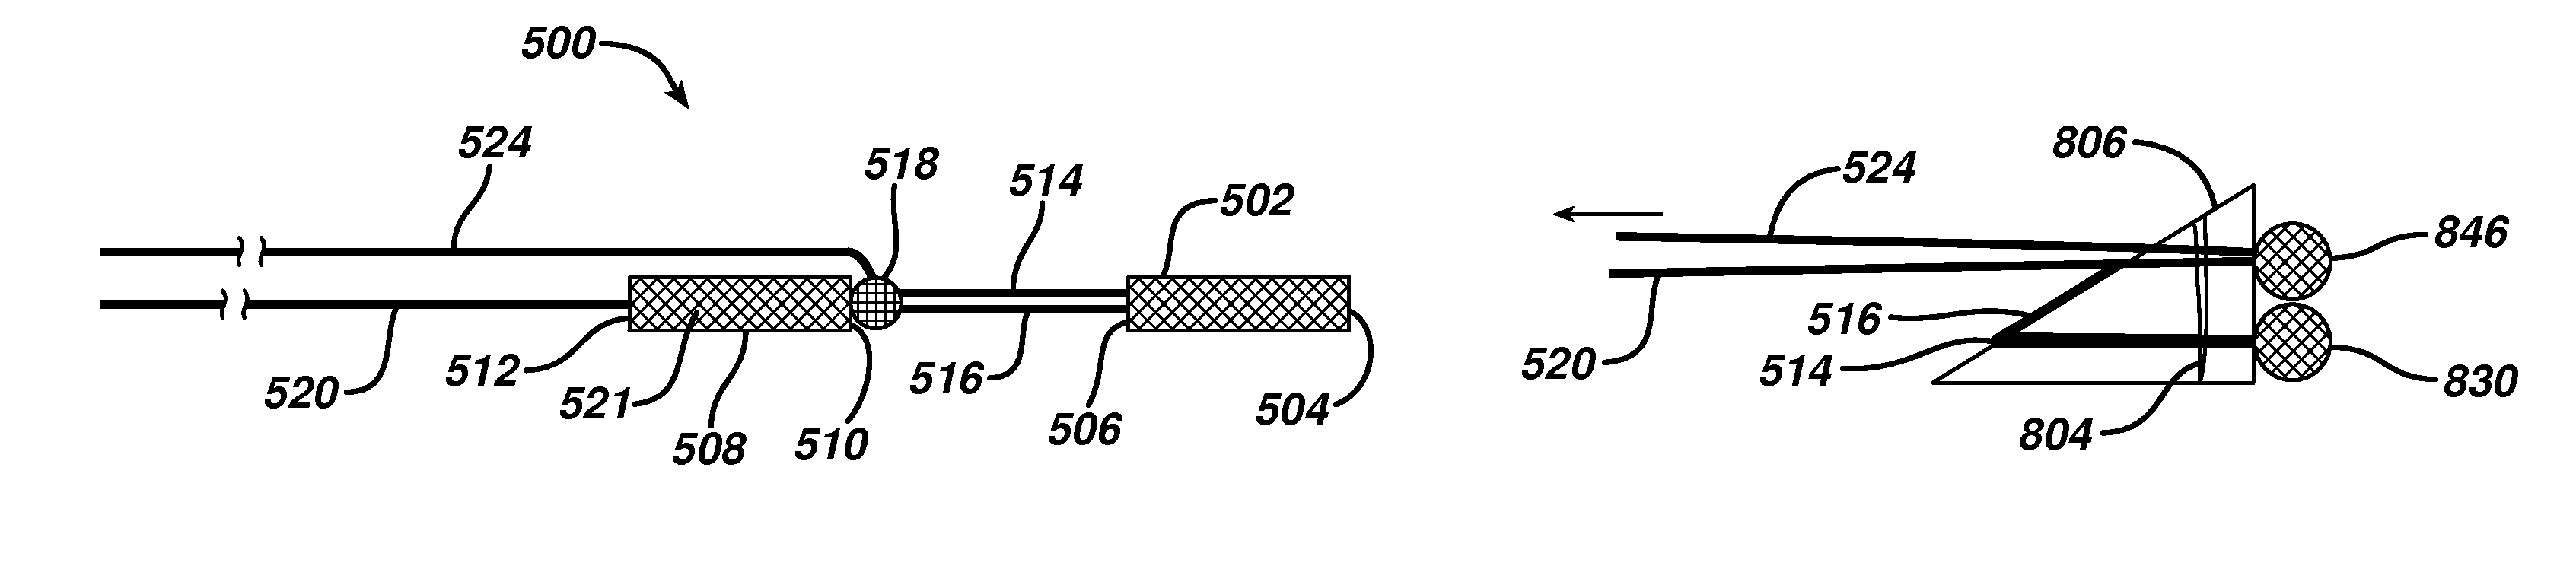 Methods and devices for repairing meniscal tissue